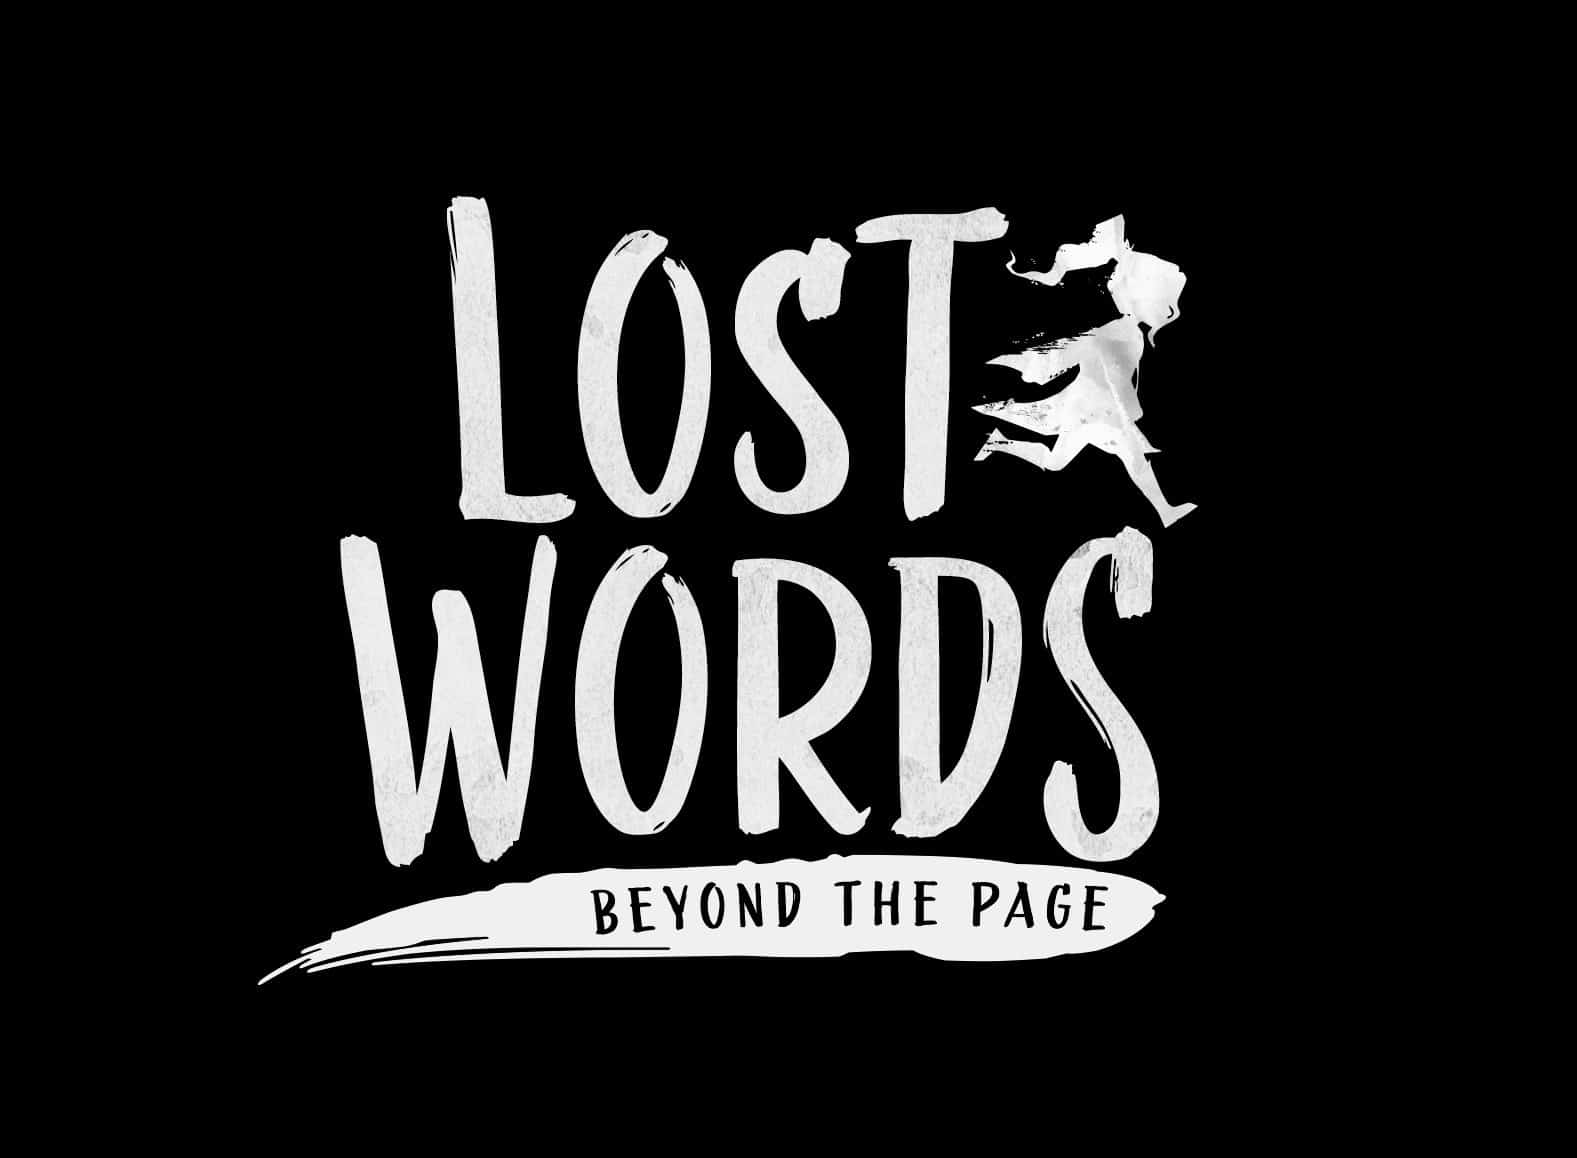 The Lost Words: Beyond the page